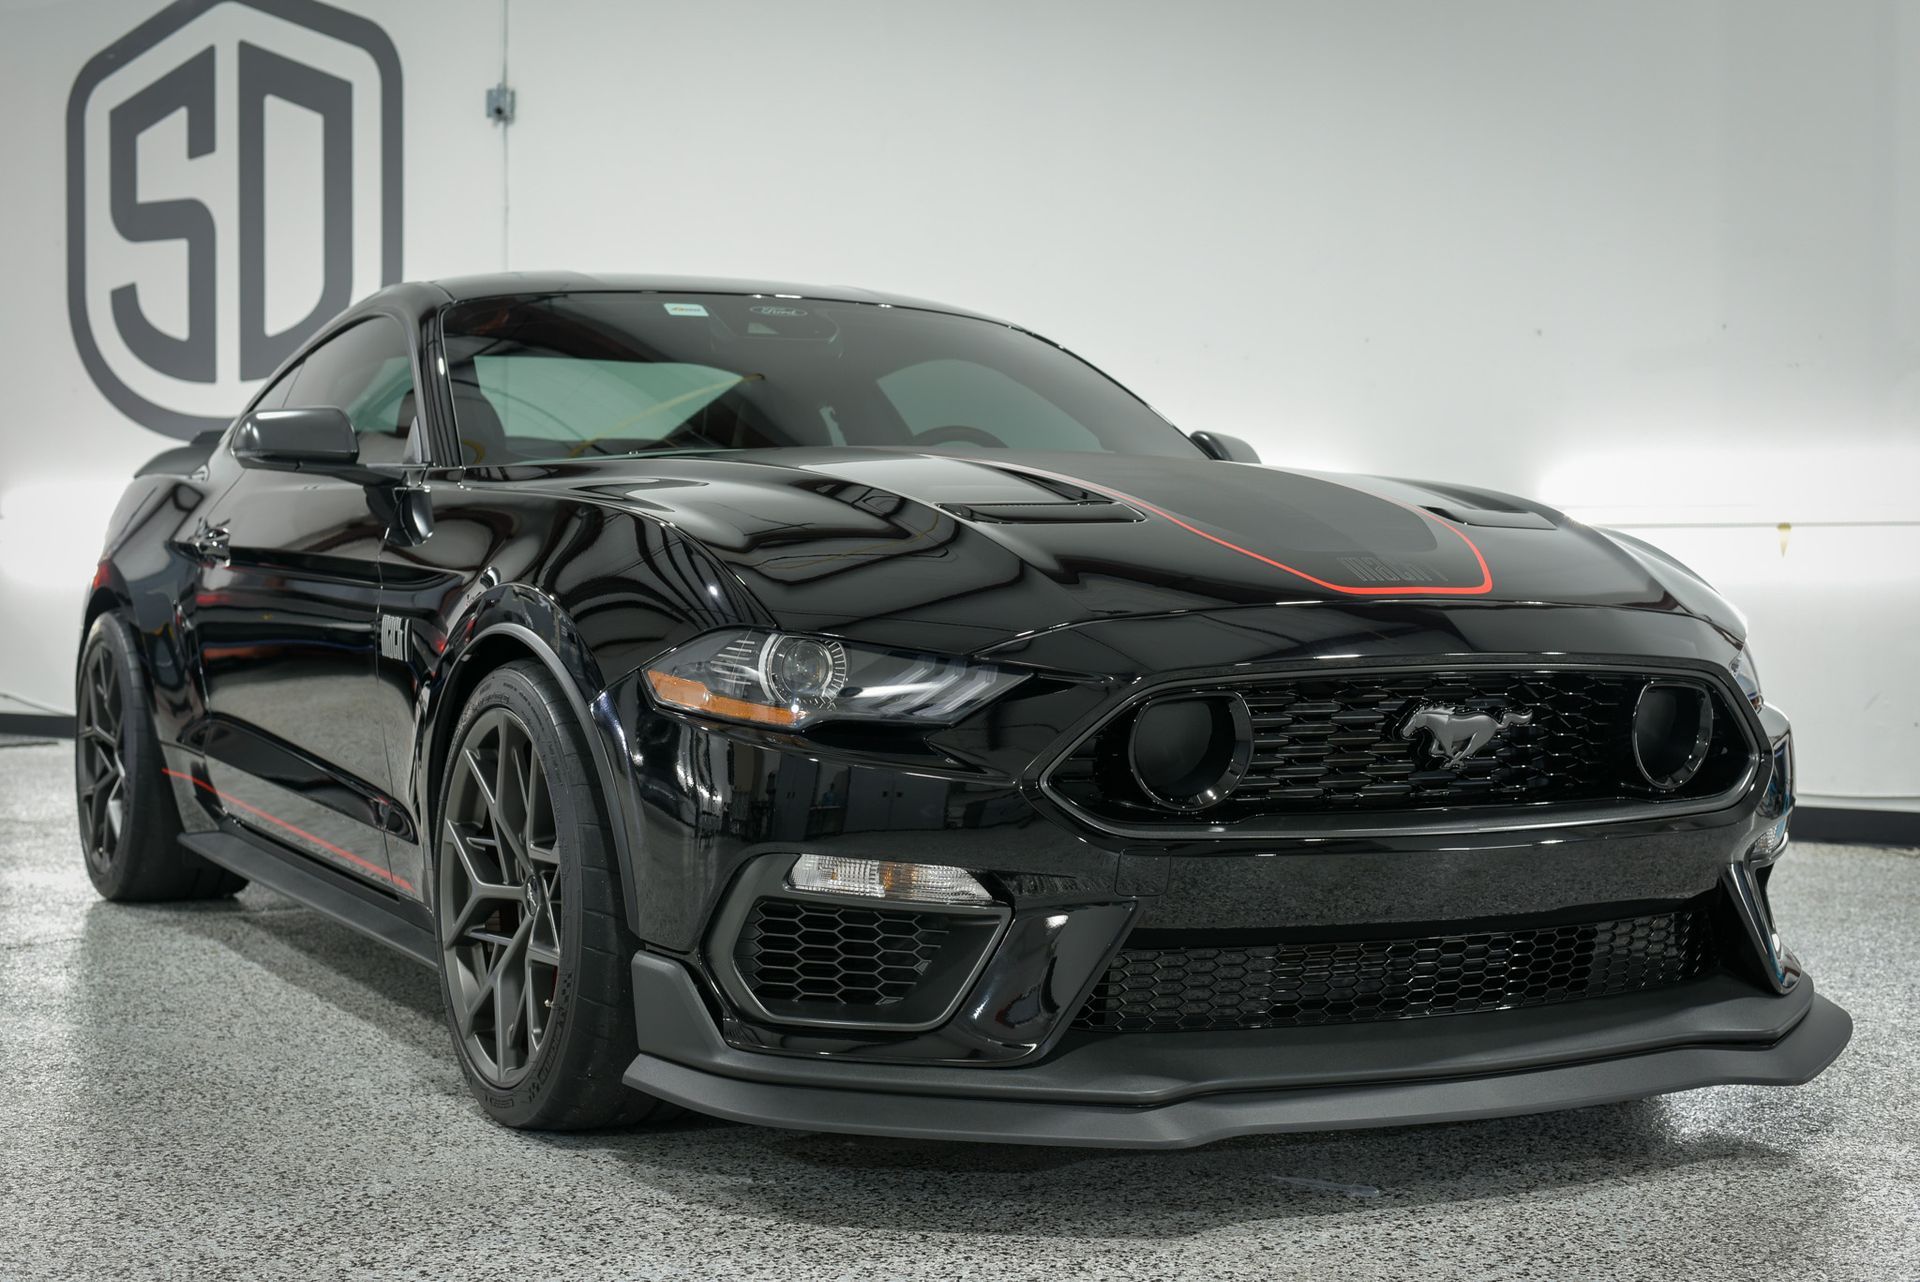 2022 Ford Mustang Mach 1 Paint Correction, Paint Protection Film (PPF), various Modesta Coatings Orlando, FL USA